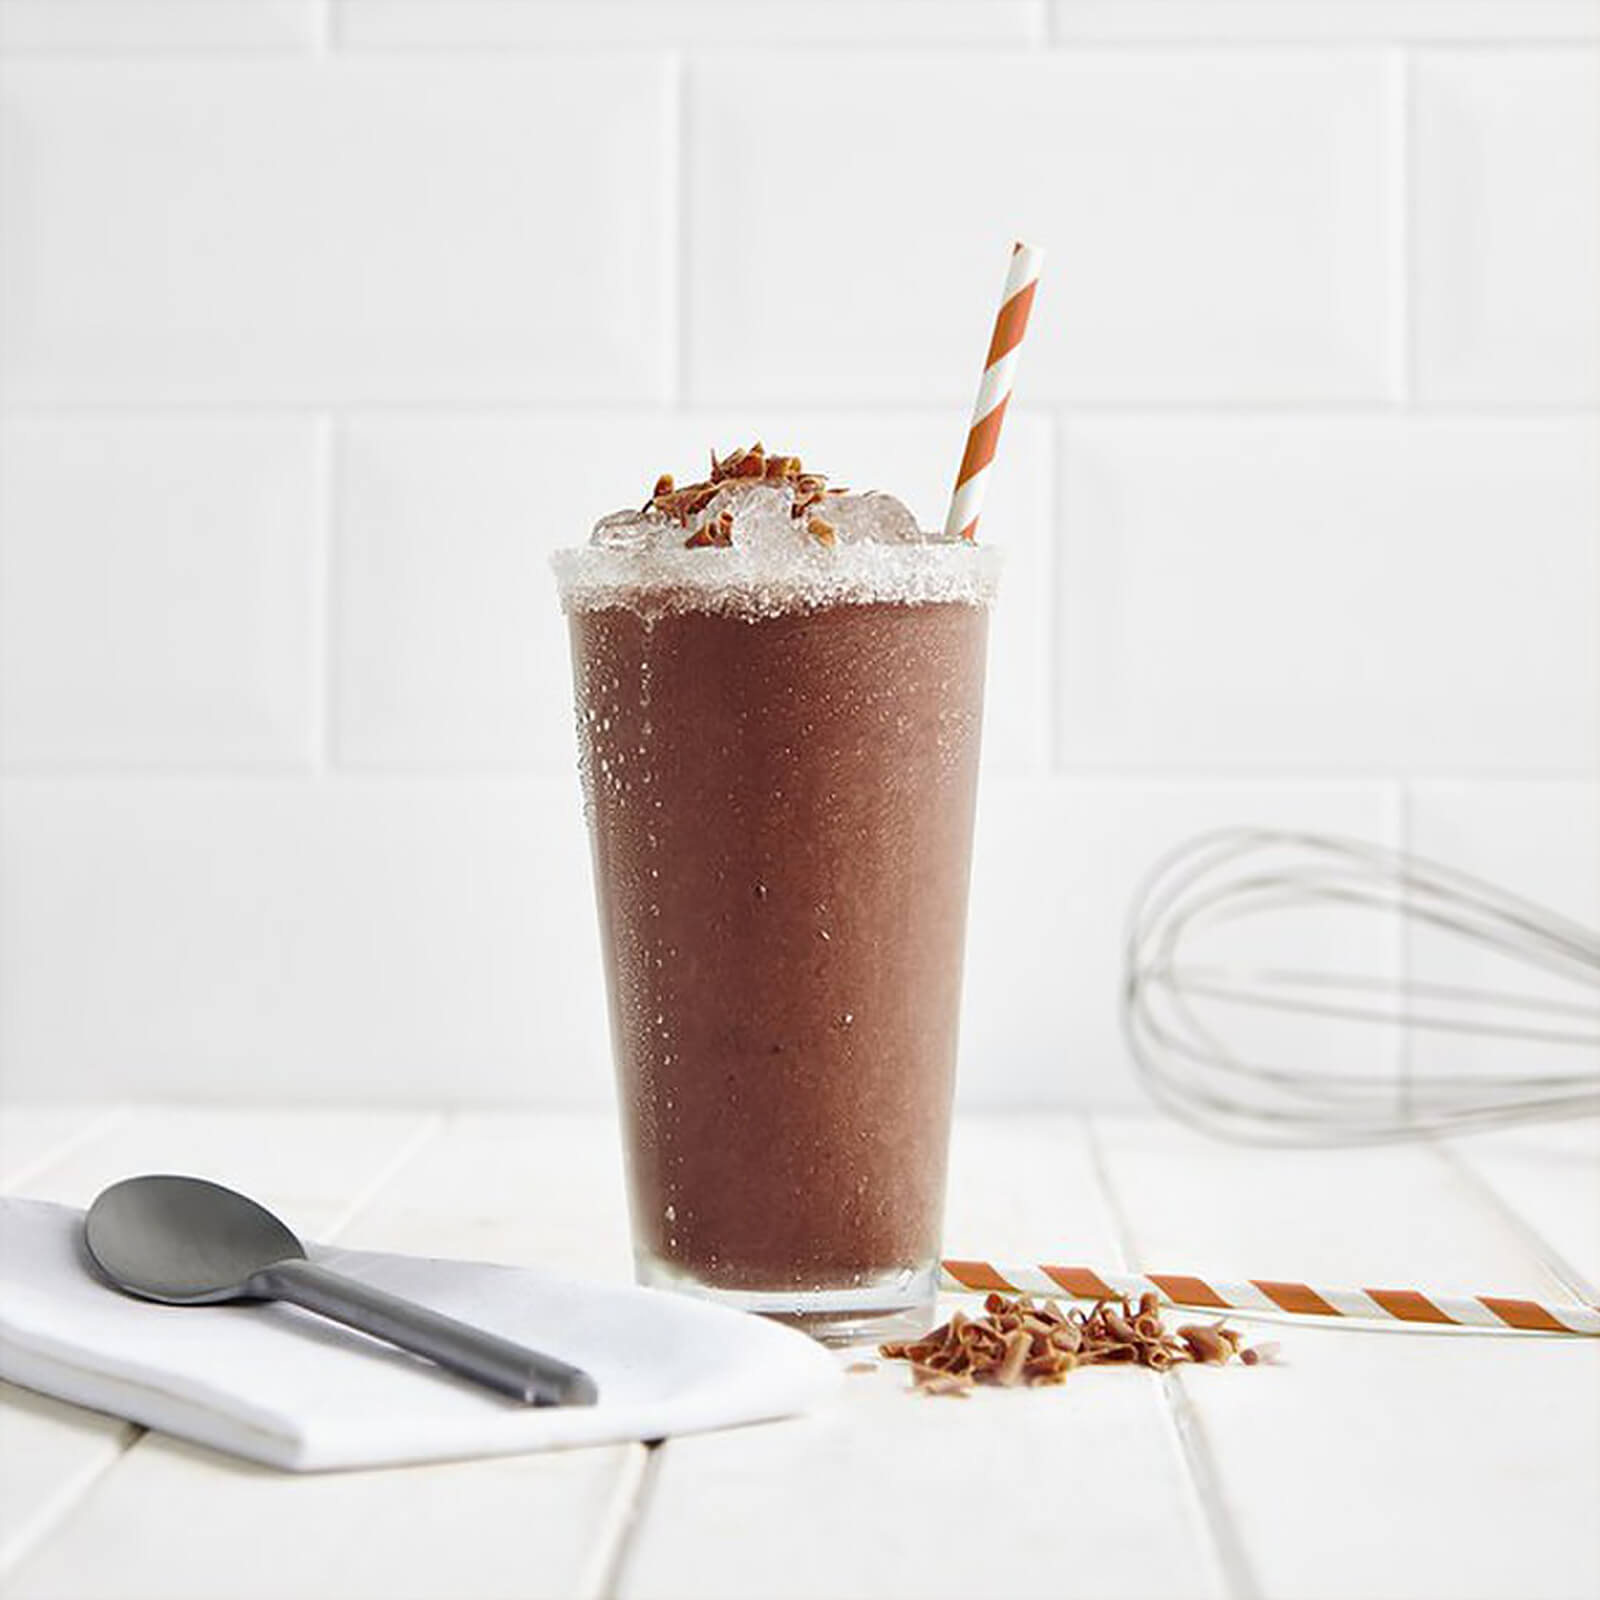 Exante Diet Meal Replacement Chocolate Shake